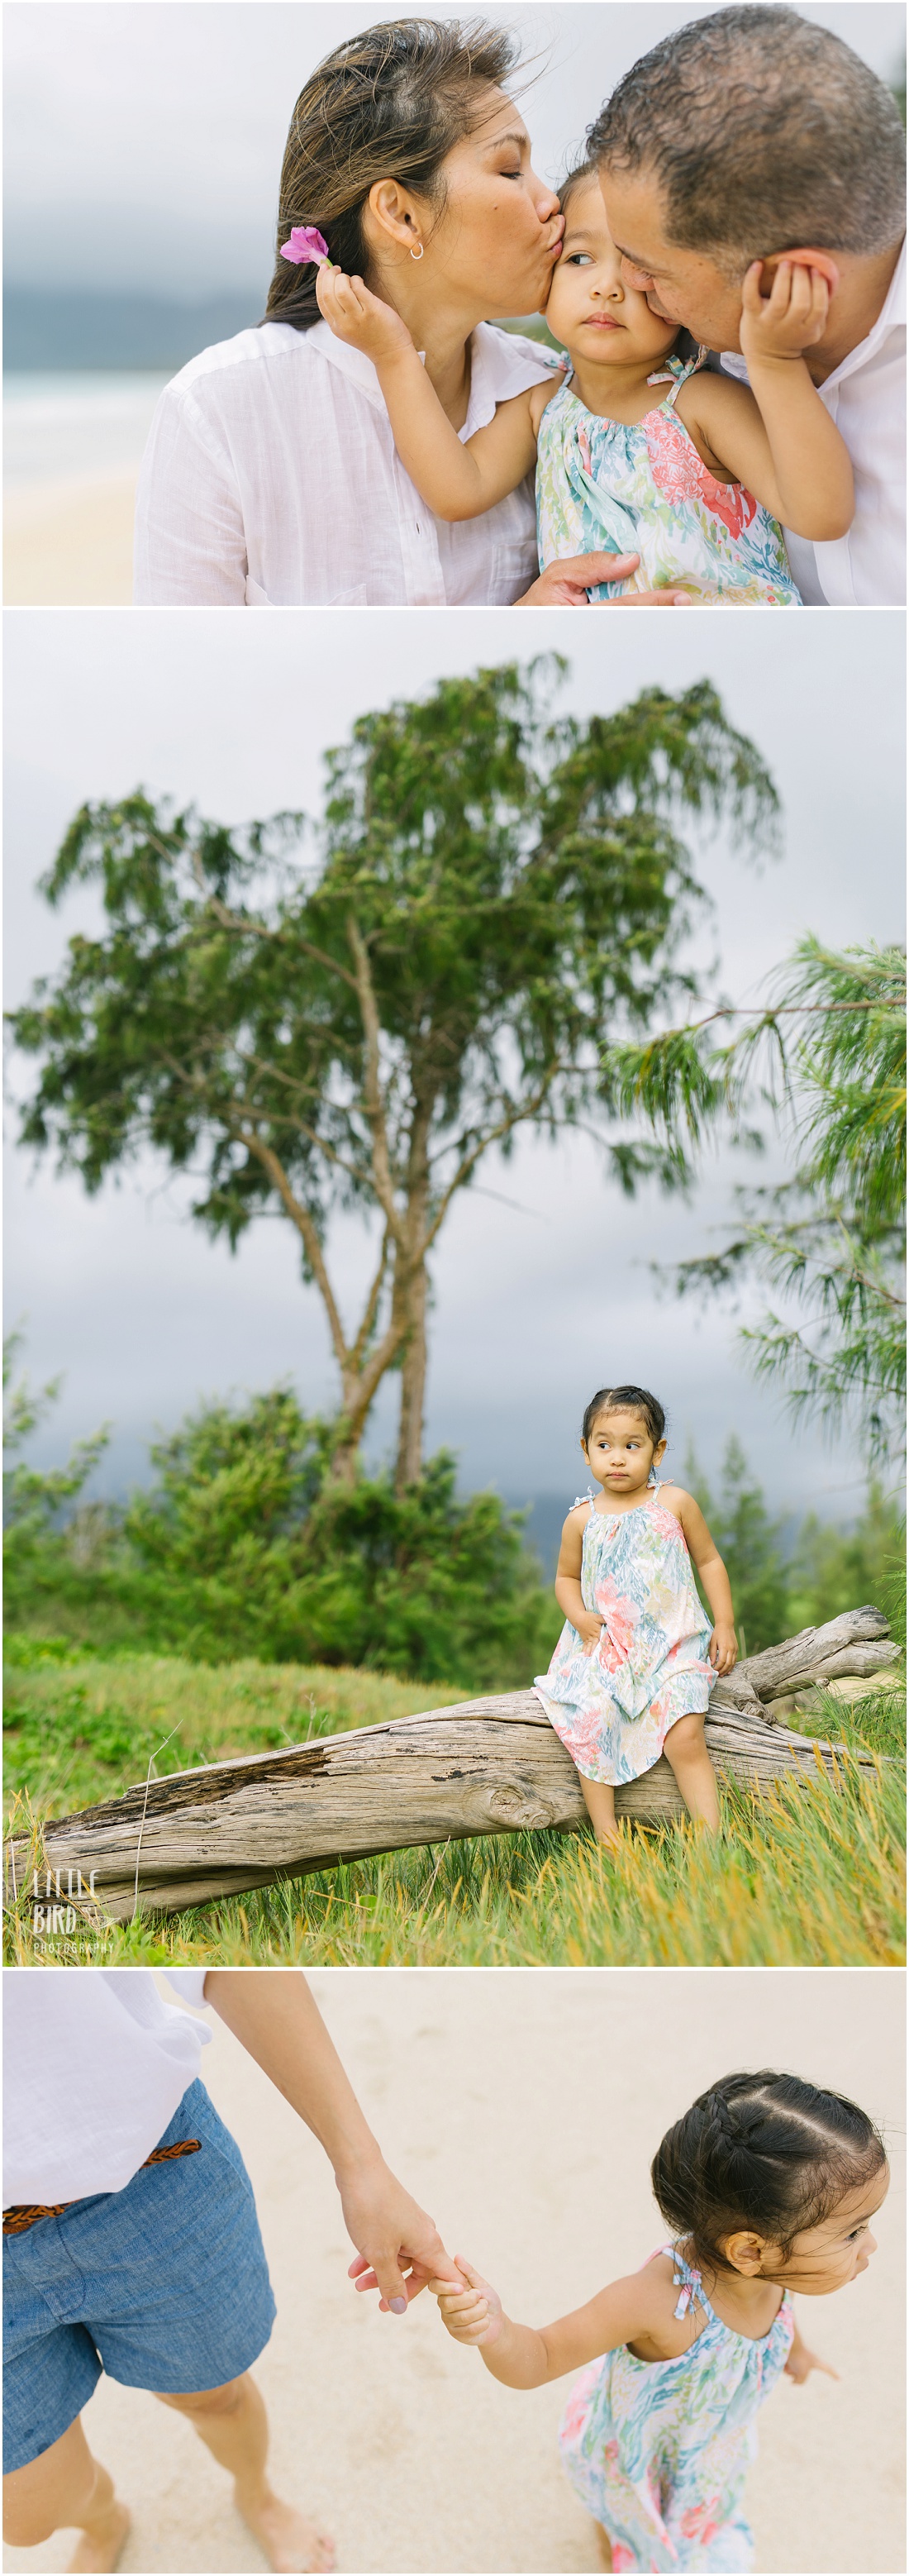 childrens portraits in hawaii